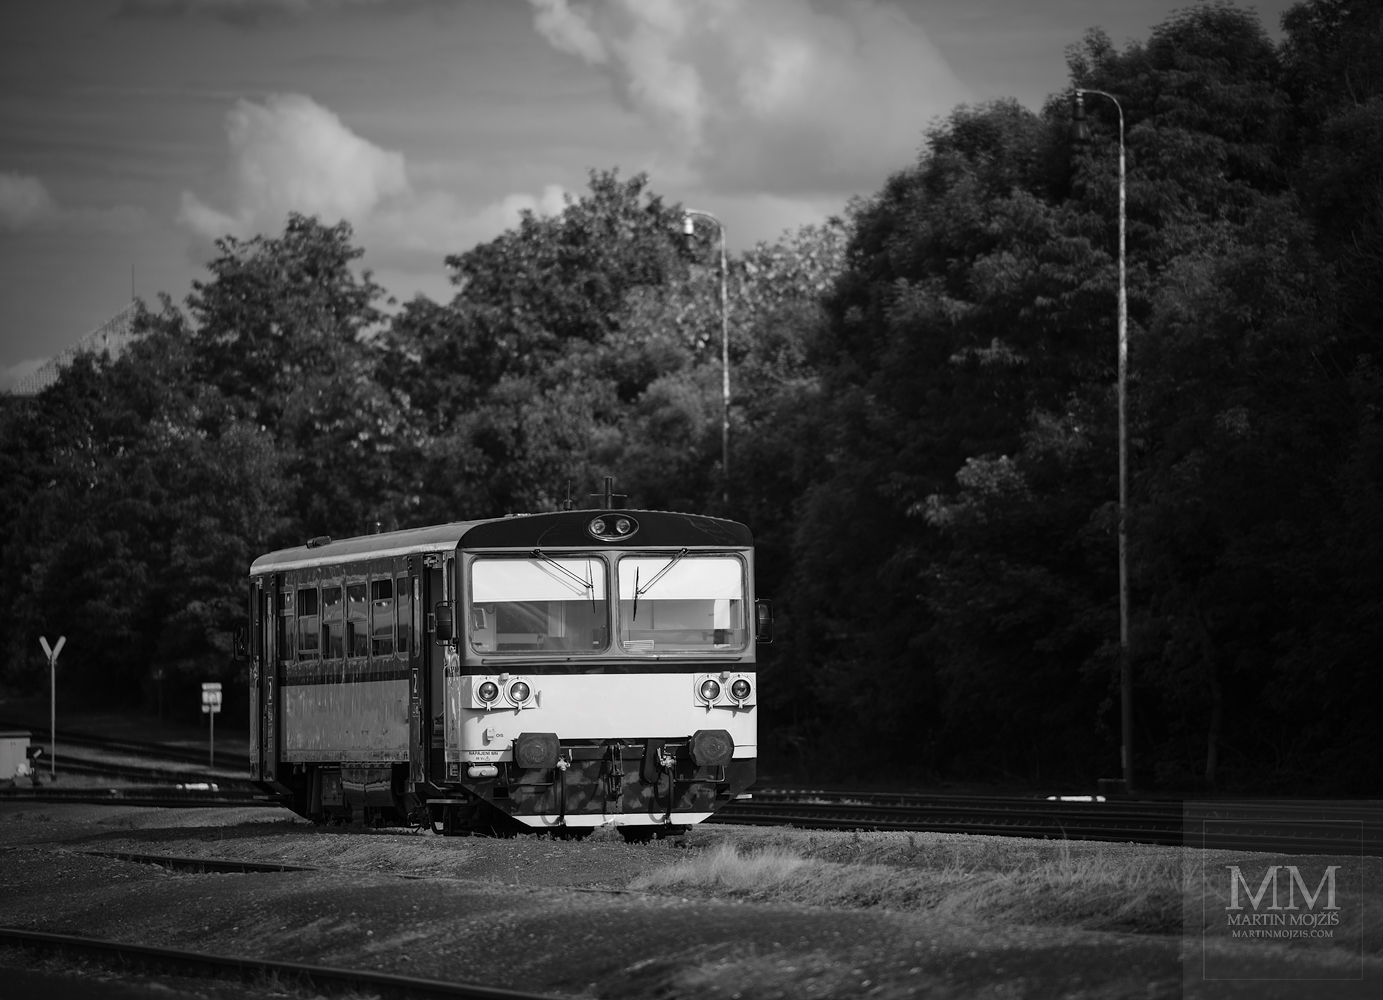 The engine train rests at the railway station before the next tour. Fine art black and white photograph IN REPOSE II, photographed by Martin Mojzis.